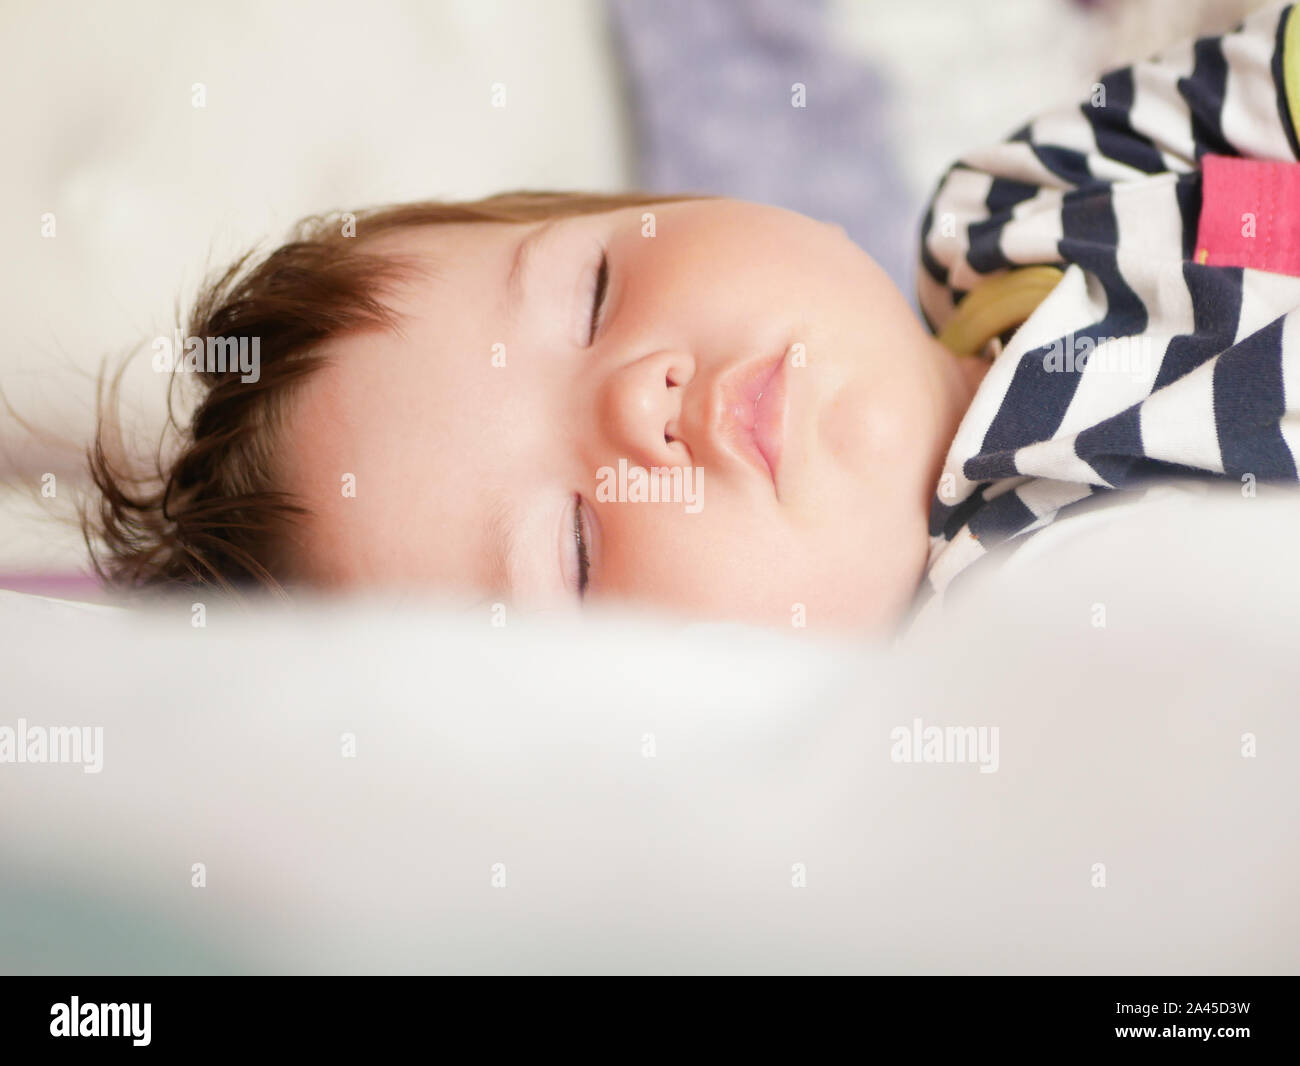 baby sleeps in parents bed. arms outstretched baby's restful sleep. close-up. child 0-1 years old. adorable lovely baby sleeps calmly in bed, has a Stock Photo